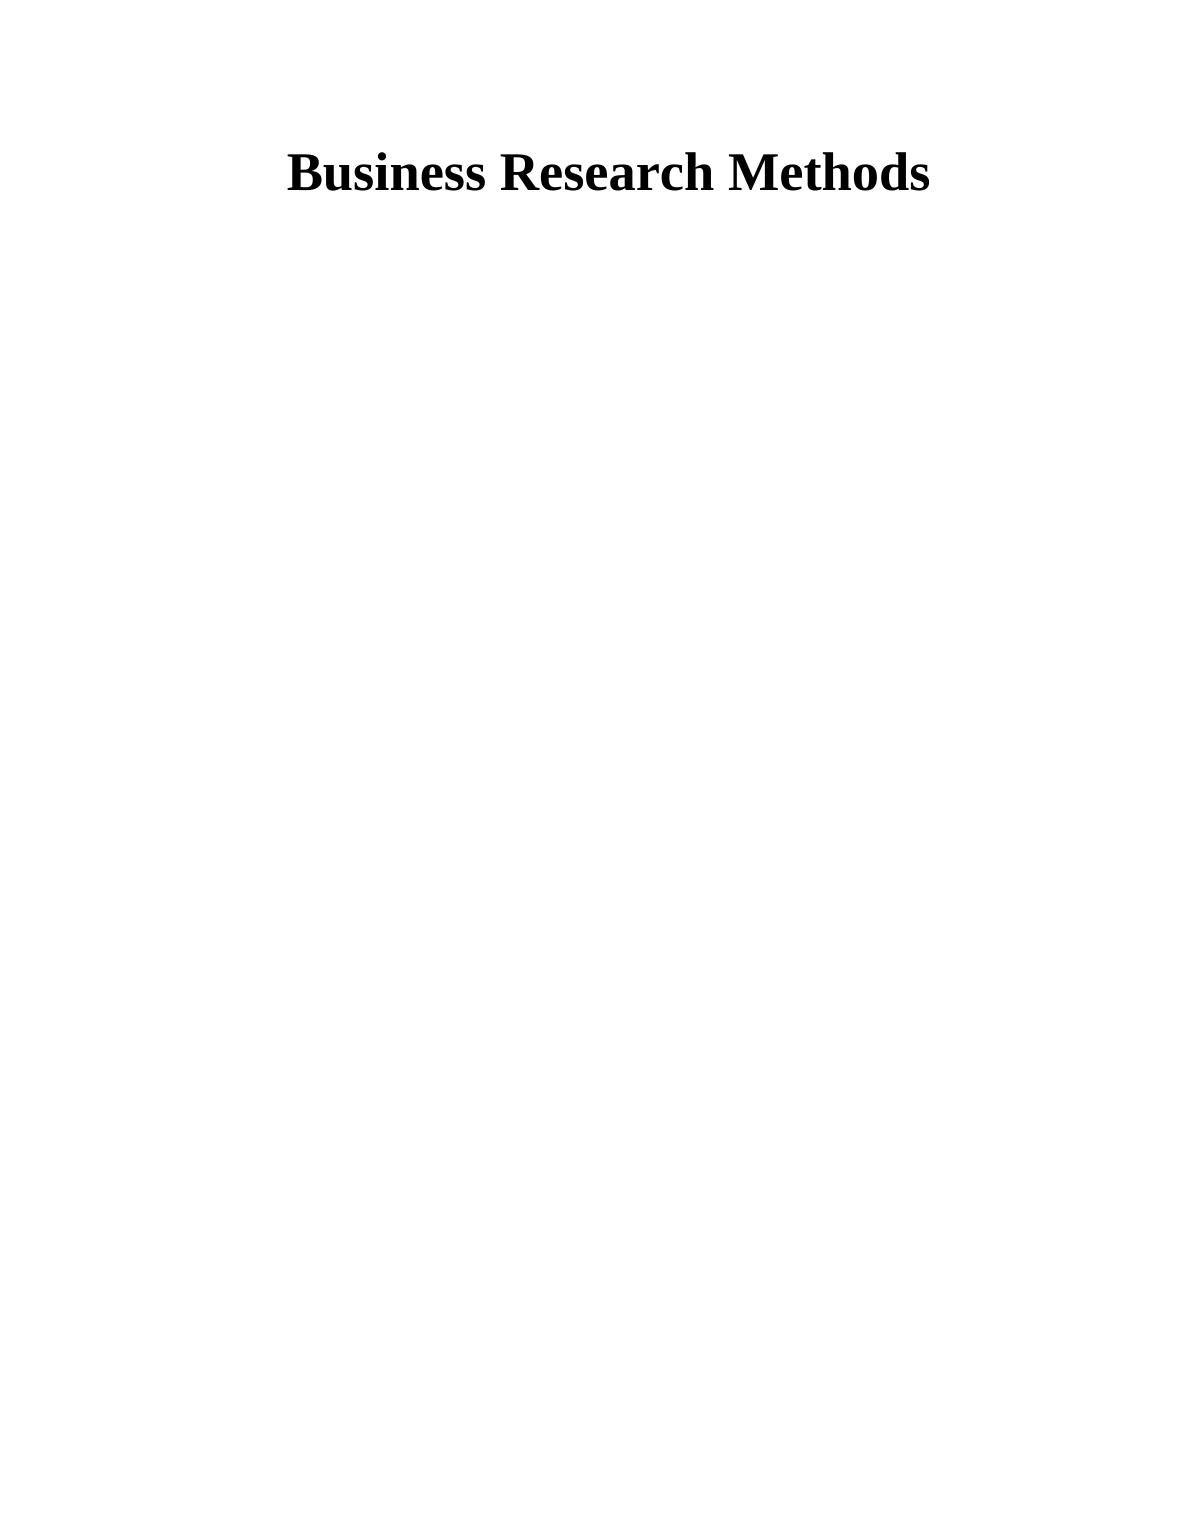 Assignment on Business Research Methods Sample_1